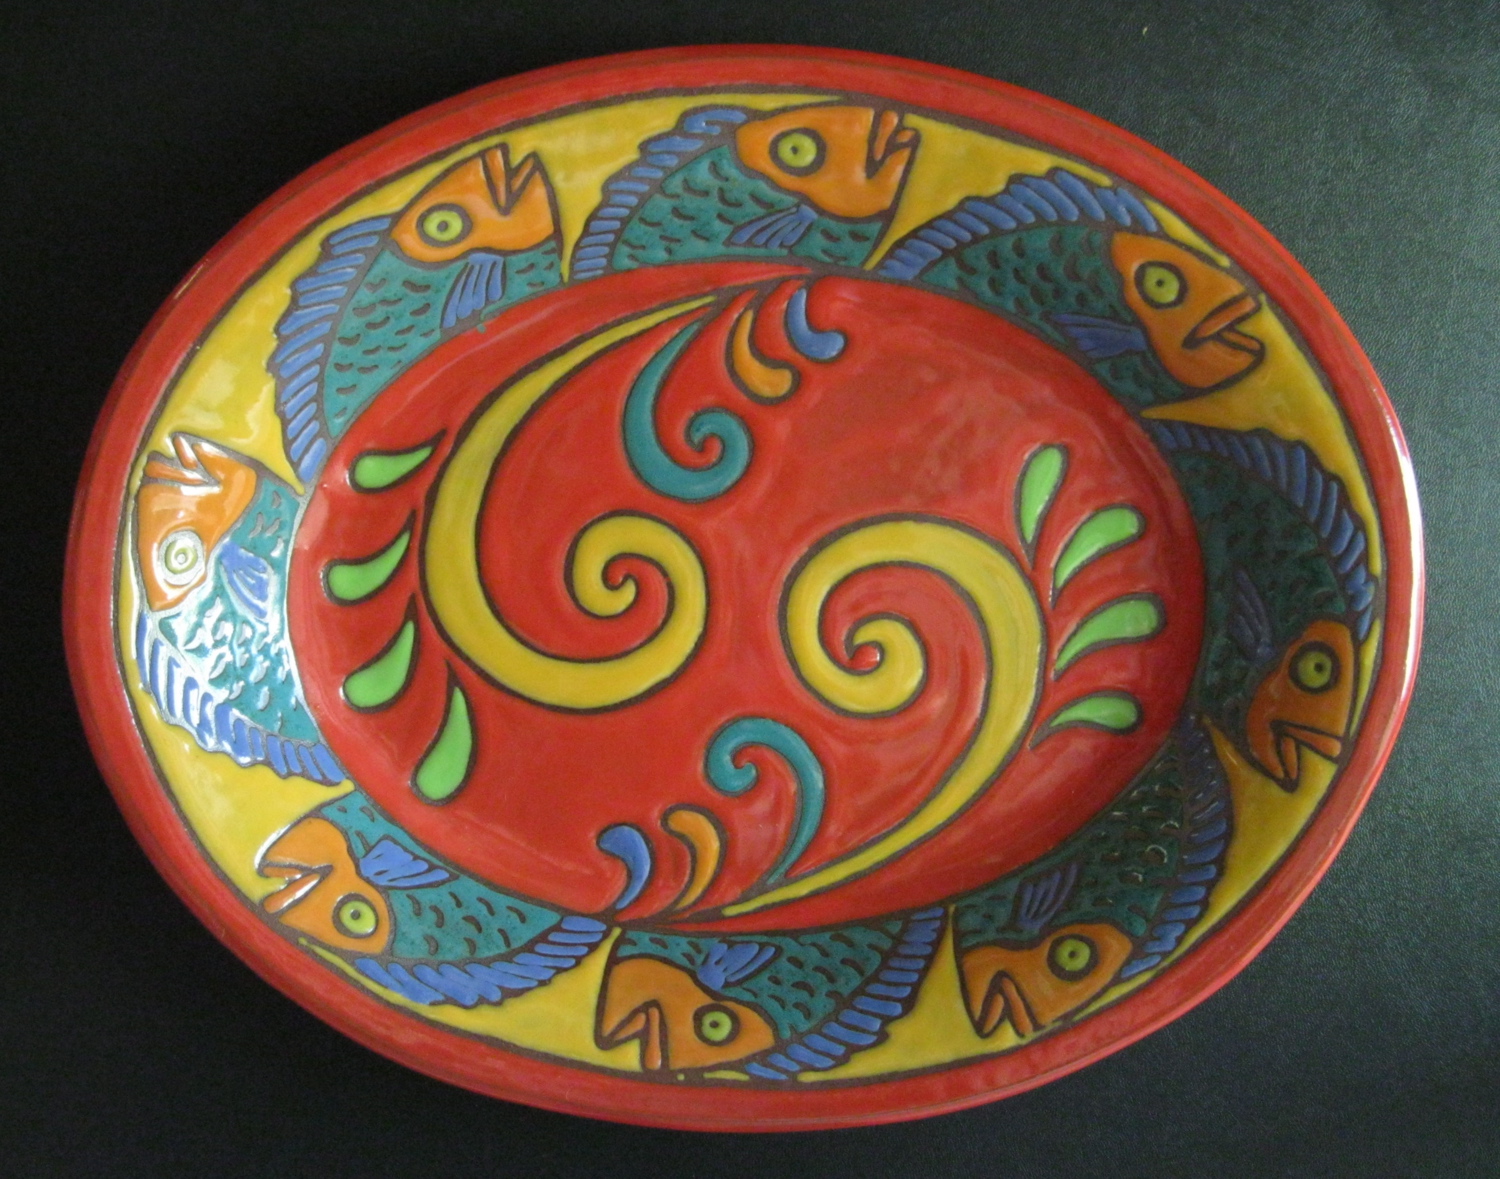 Red and Yellow Oval Serving Dish with Cuerda Seca Fish Design